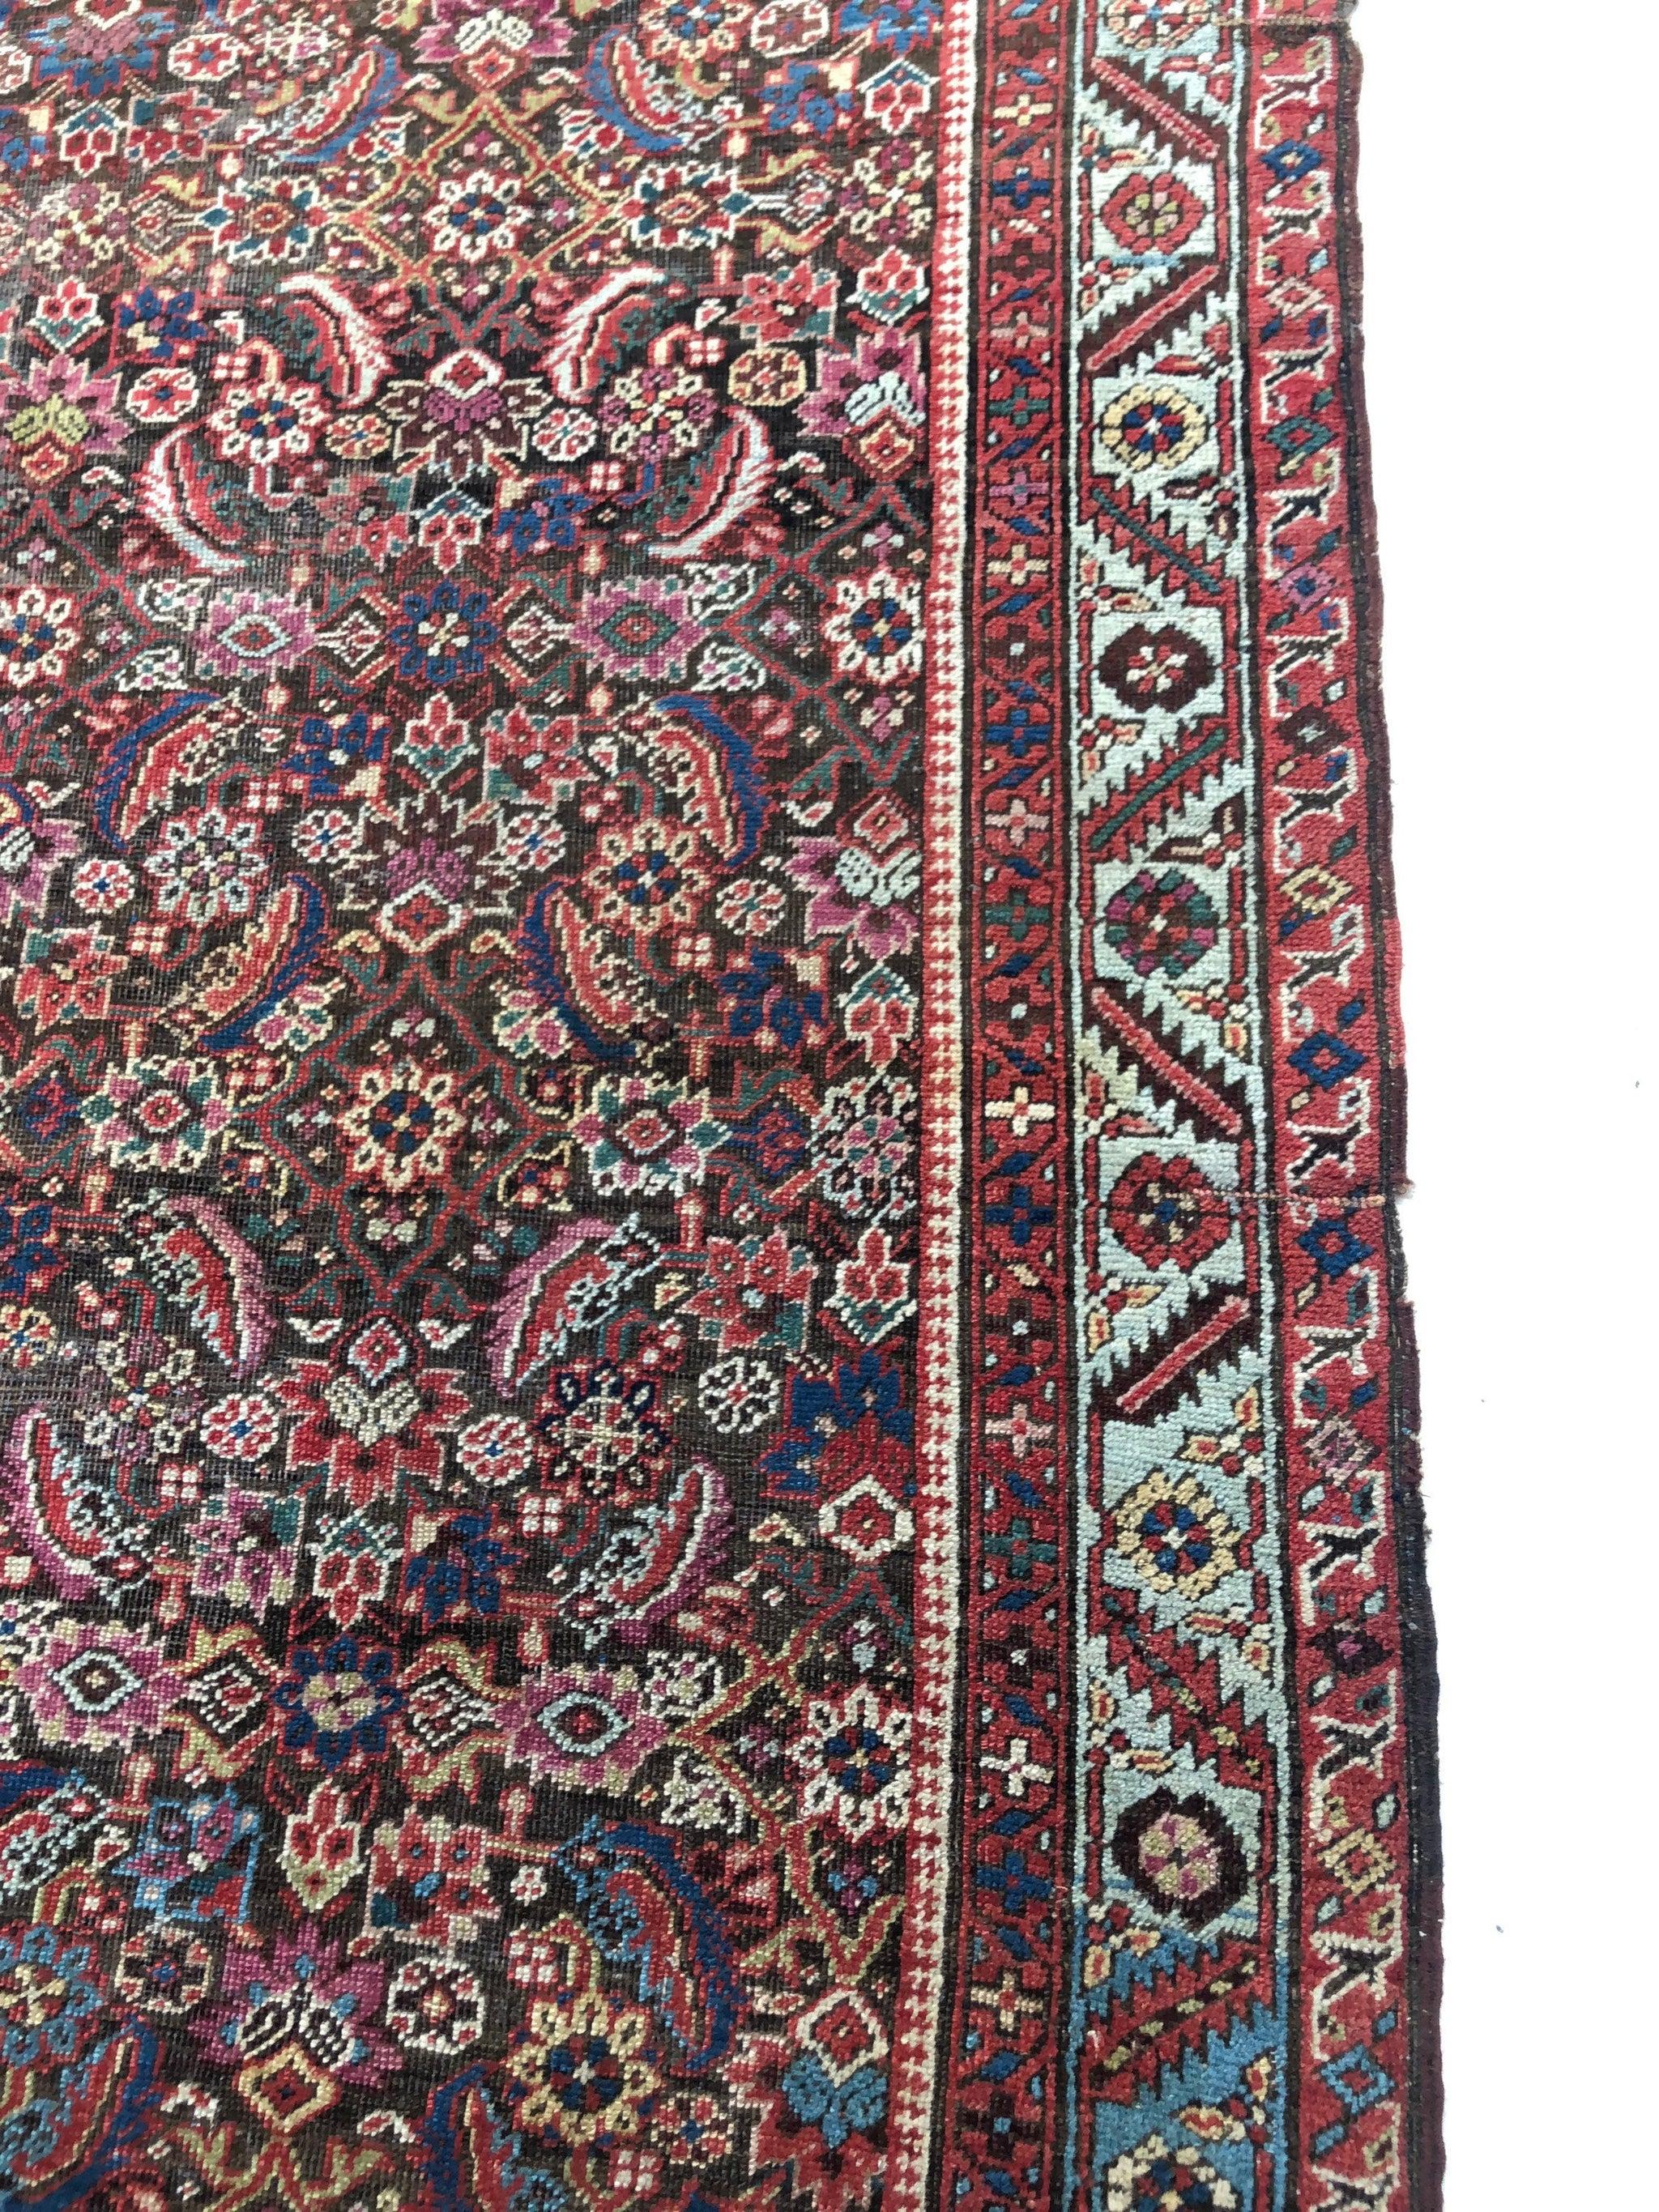 Beautiful European sized Ancient rug

About: The size alone is rare, let alone the unbelievable color palette; eggplant, magenta, lilac, ice blue, honey-yellow, soft rust, antique beige, lake blue/french blue, sky blue, hints of grass green and